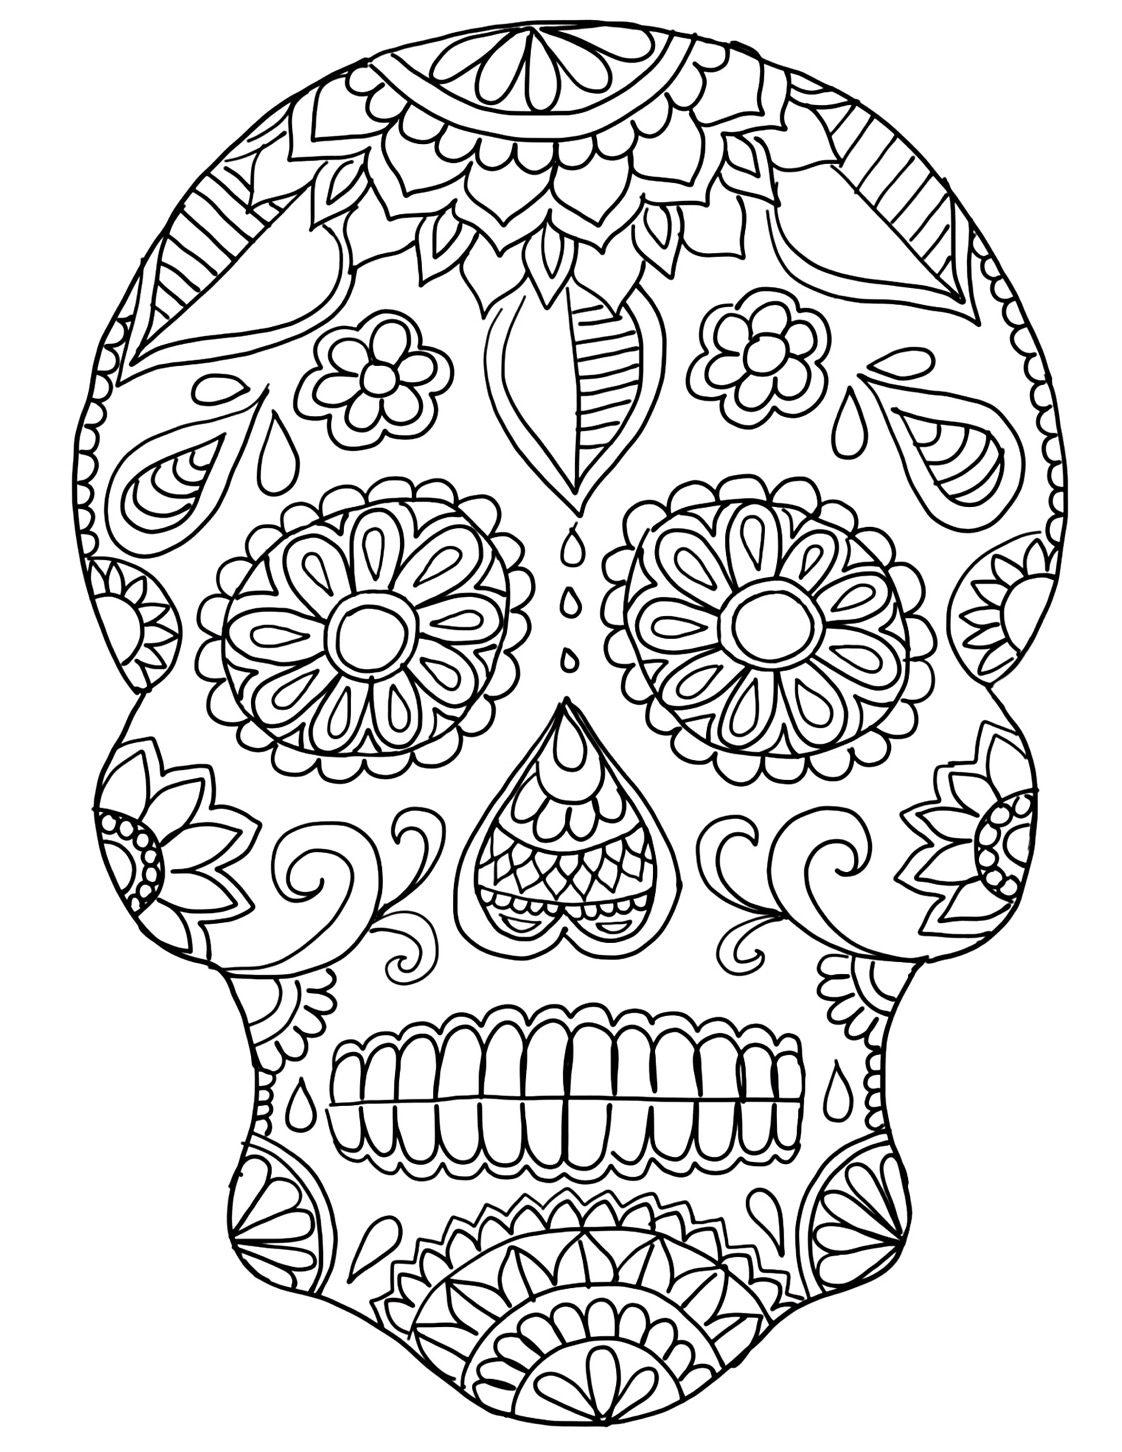 Day Of The Dead Coloring Pages Pdf at Free printable